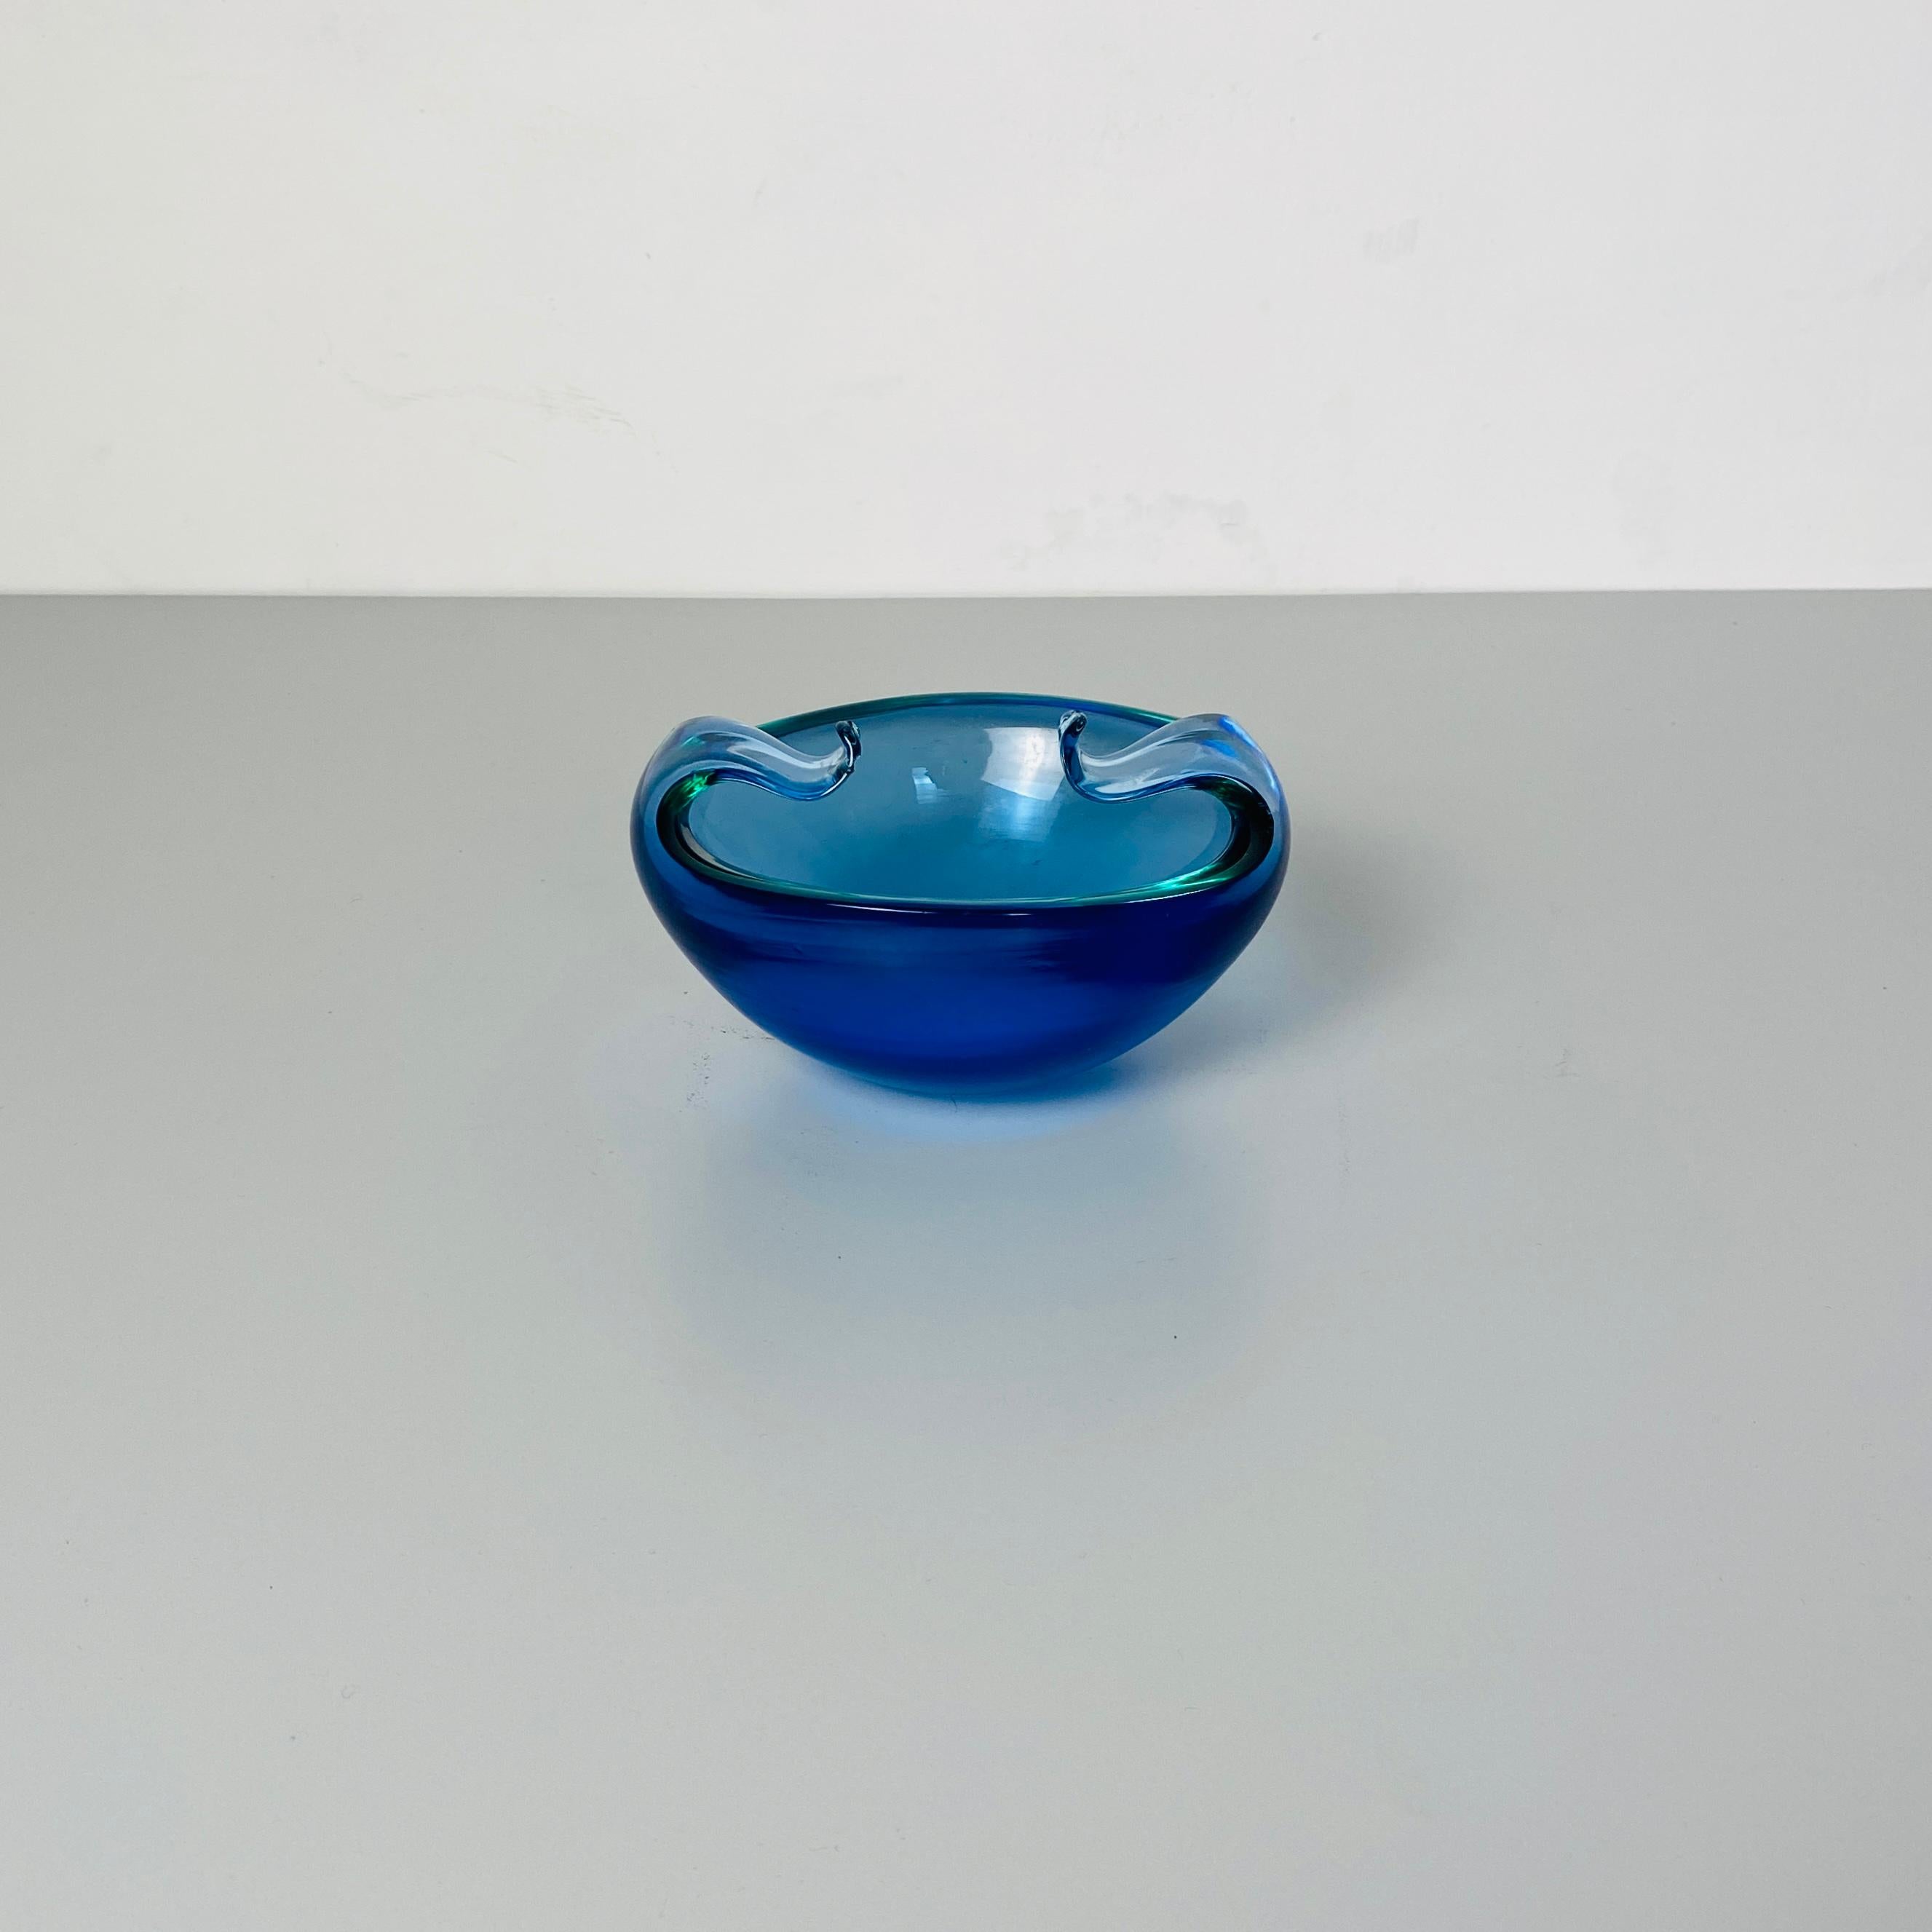 Italian Mid-Century Modern Murano Glass Object Holder with Curled Arms, 1970s For Sale 2